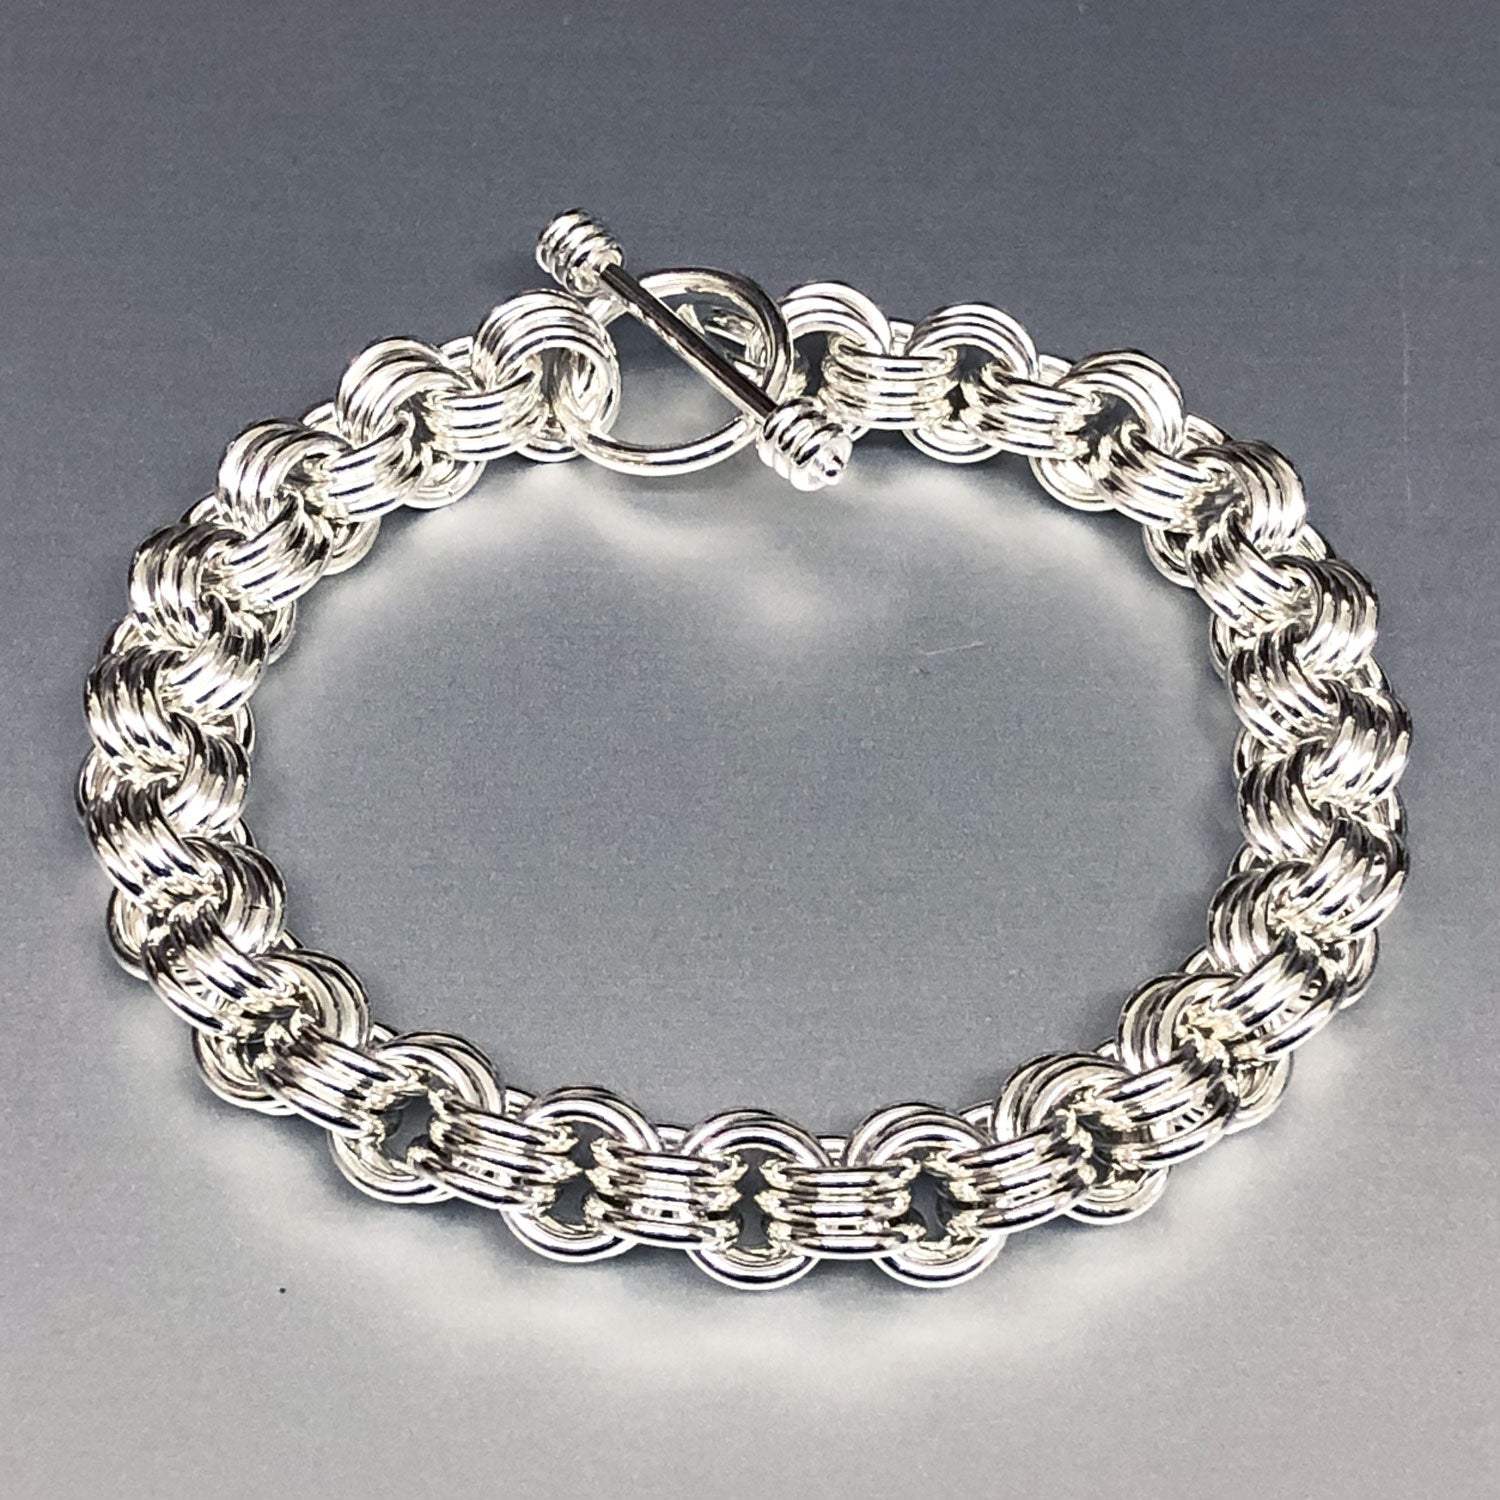 Silver 19cm Open Link Bracelet | Angus & Coote